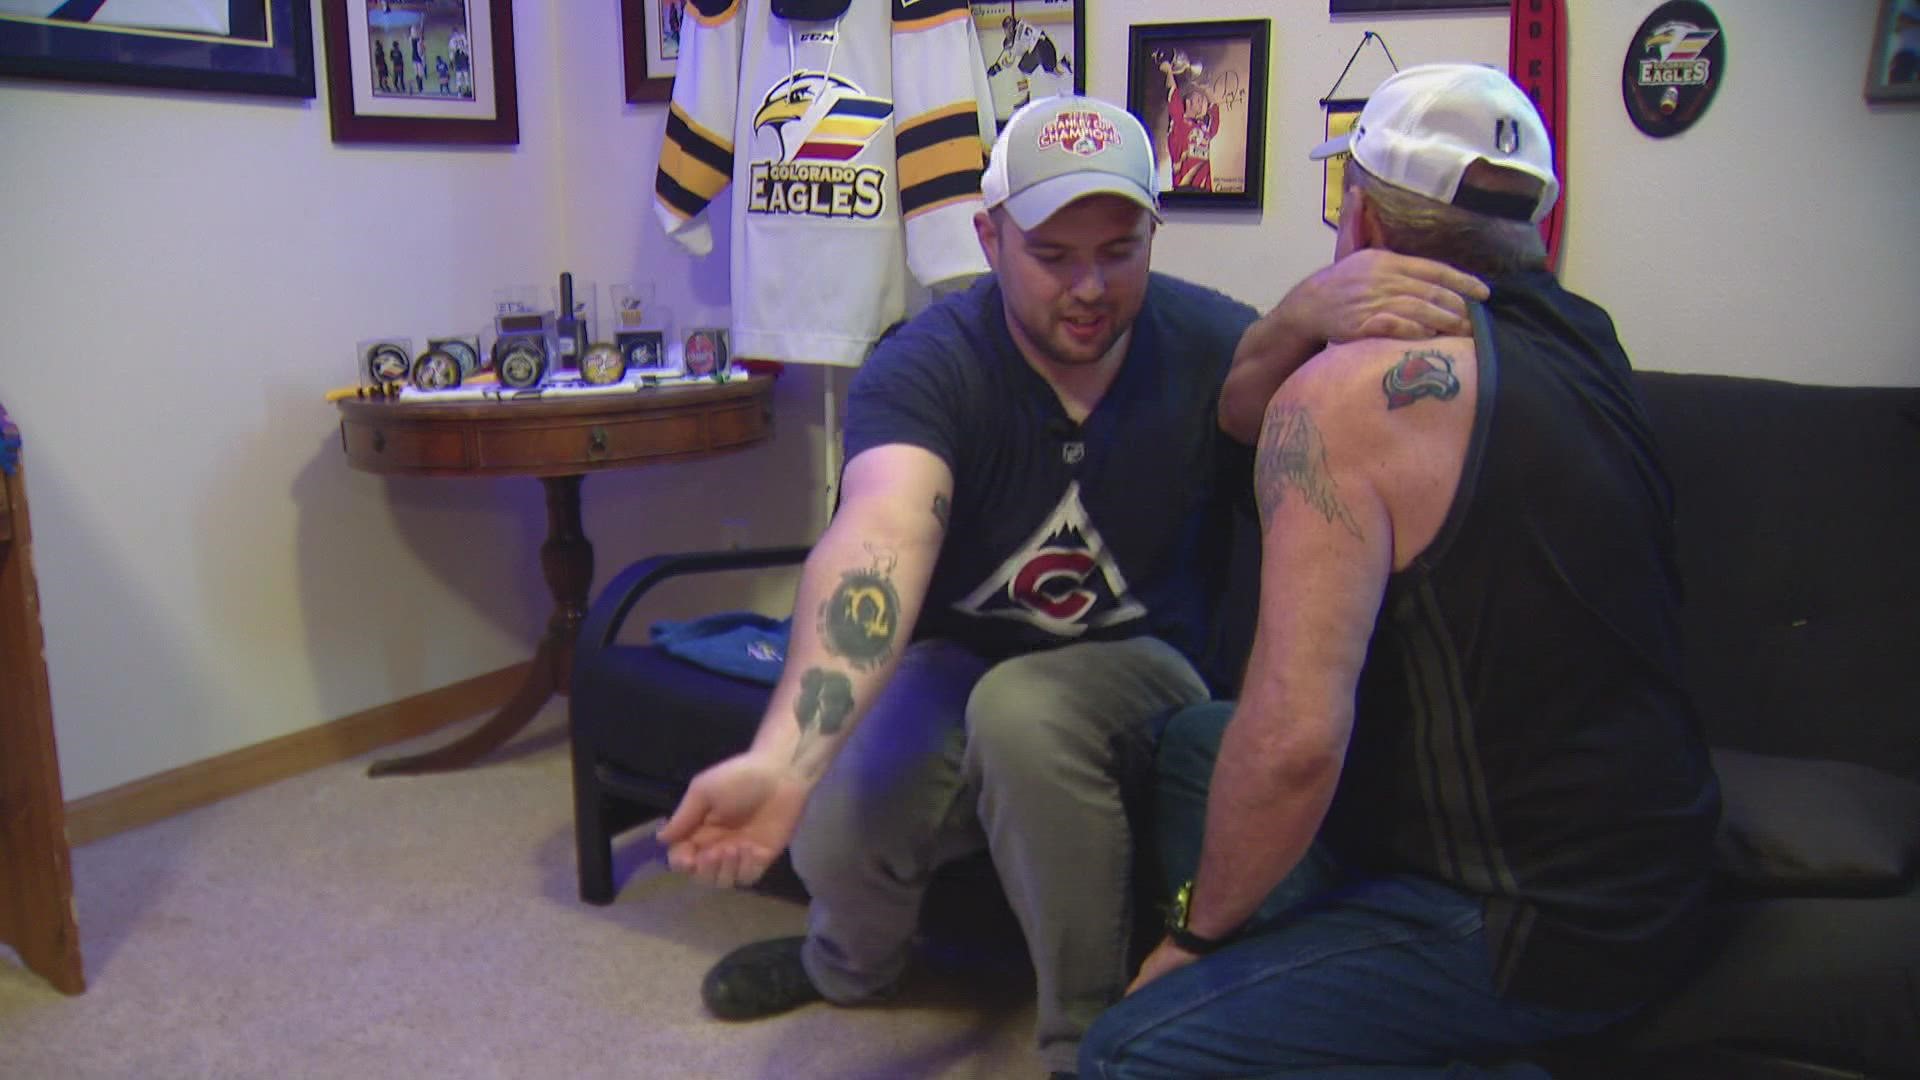 A family that bonds over hockey will forever have the memories of the Stanley Cup championship on their skin after Avalanche win.